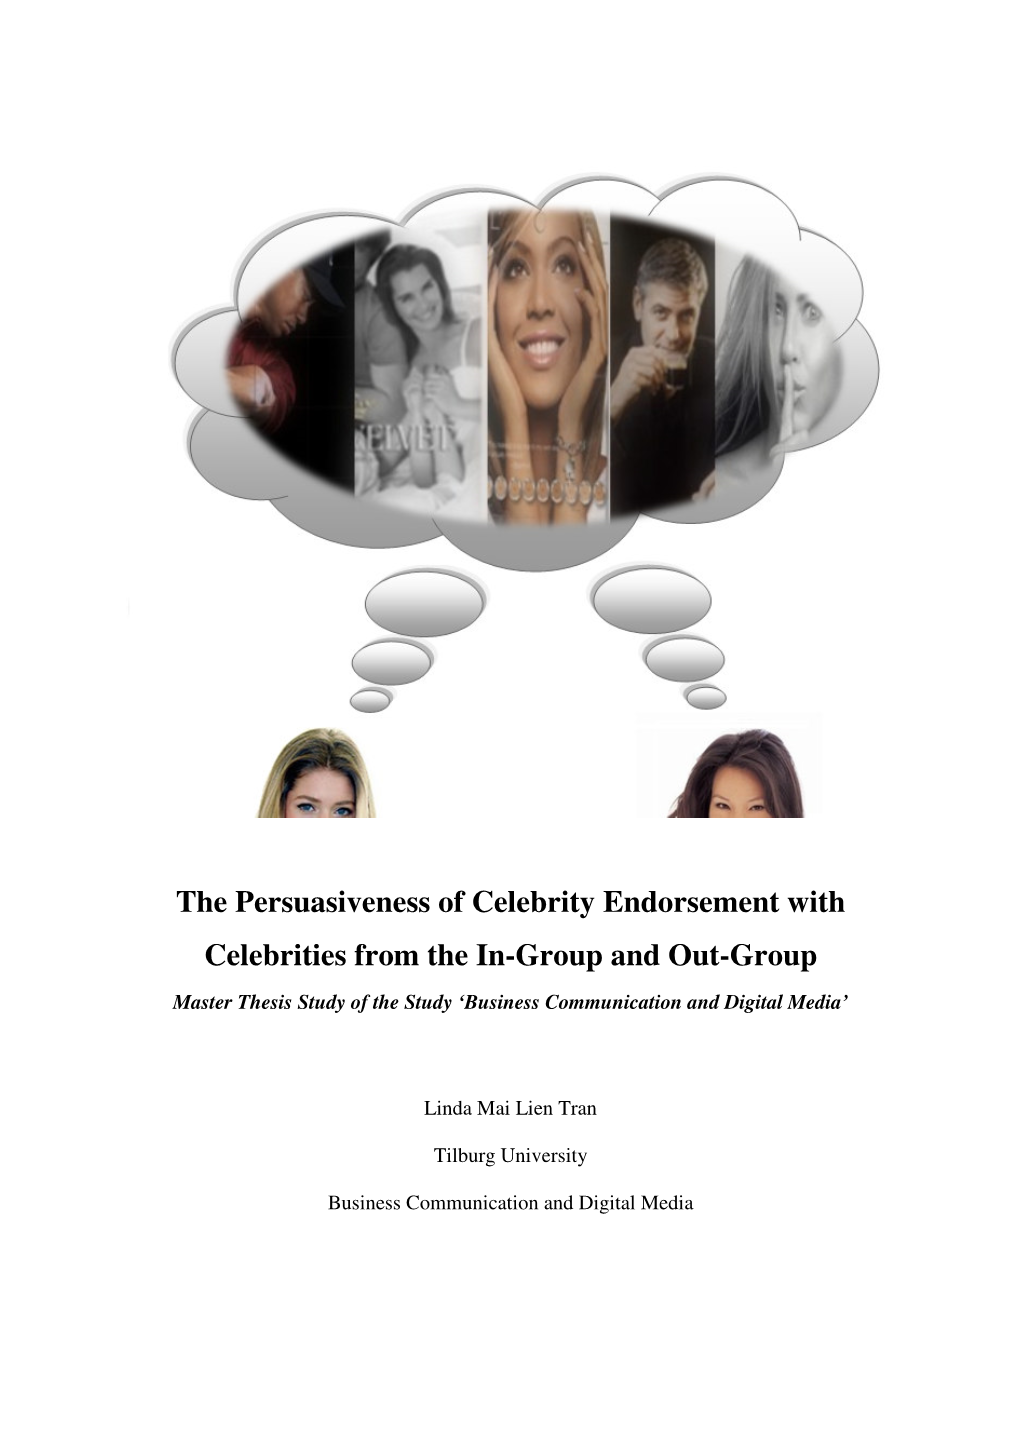 The Persuasiveness of Celebrity Endorsement with Celebrities from the In-Group and Out-Group